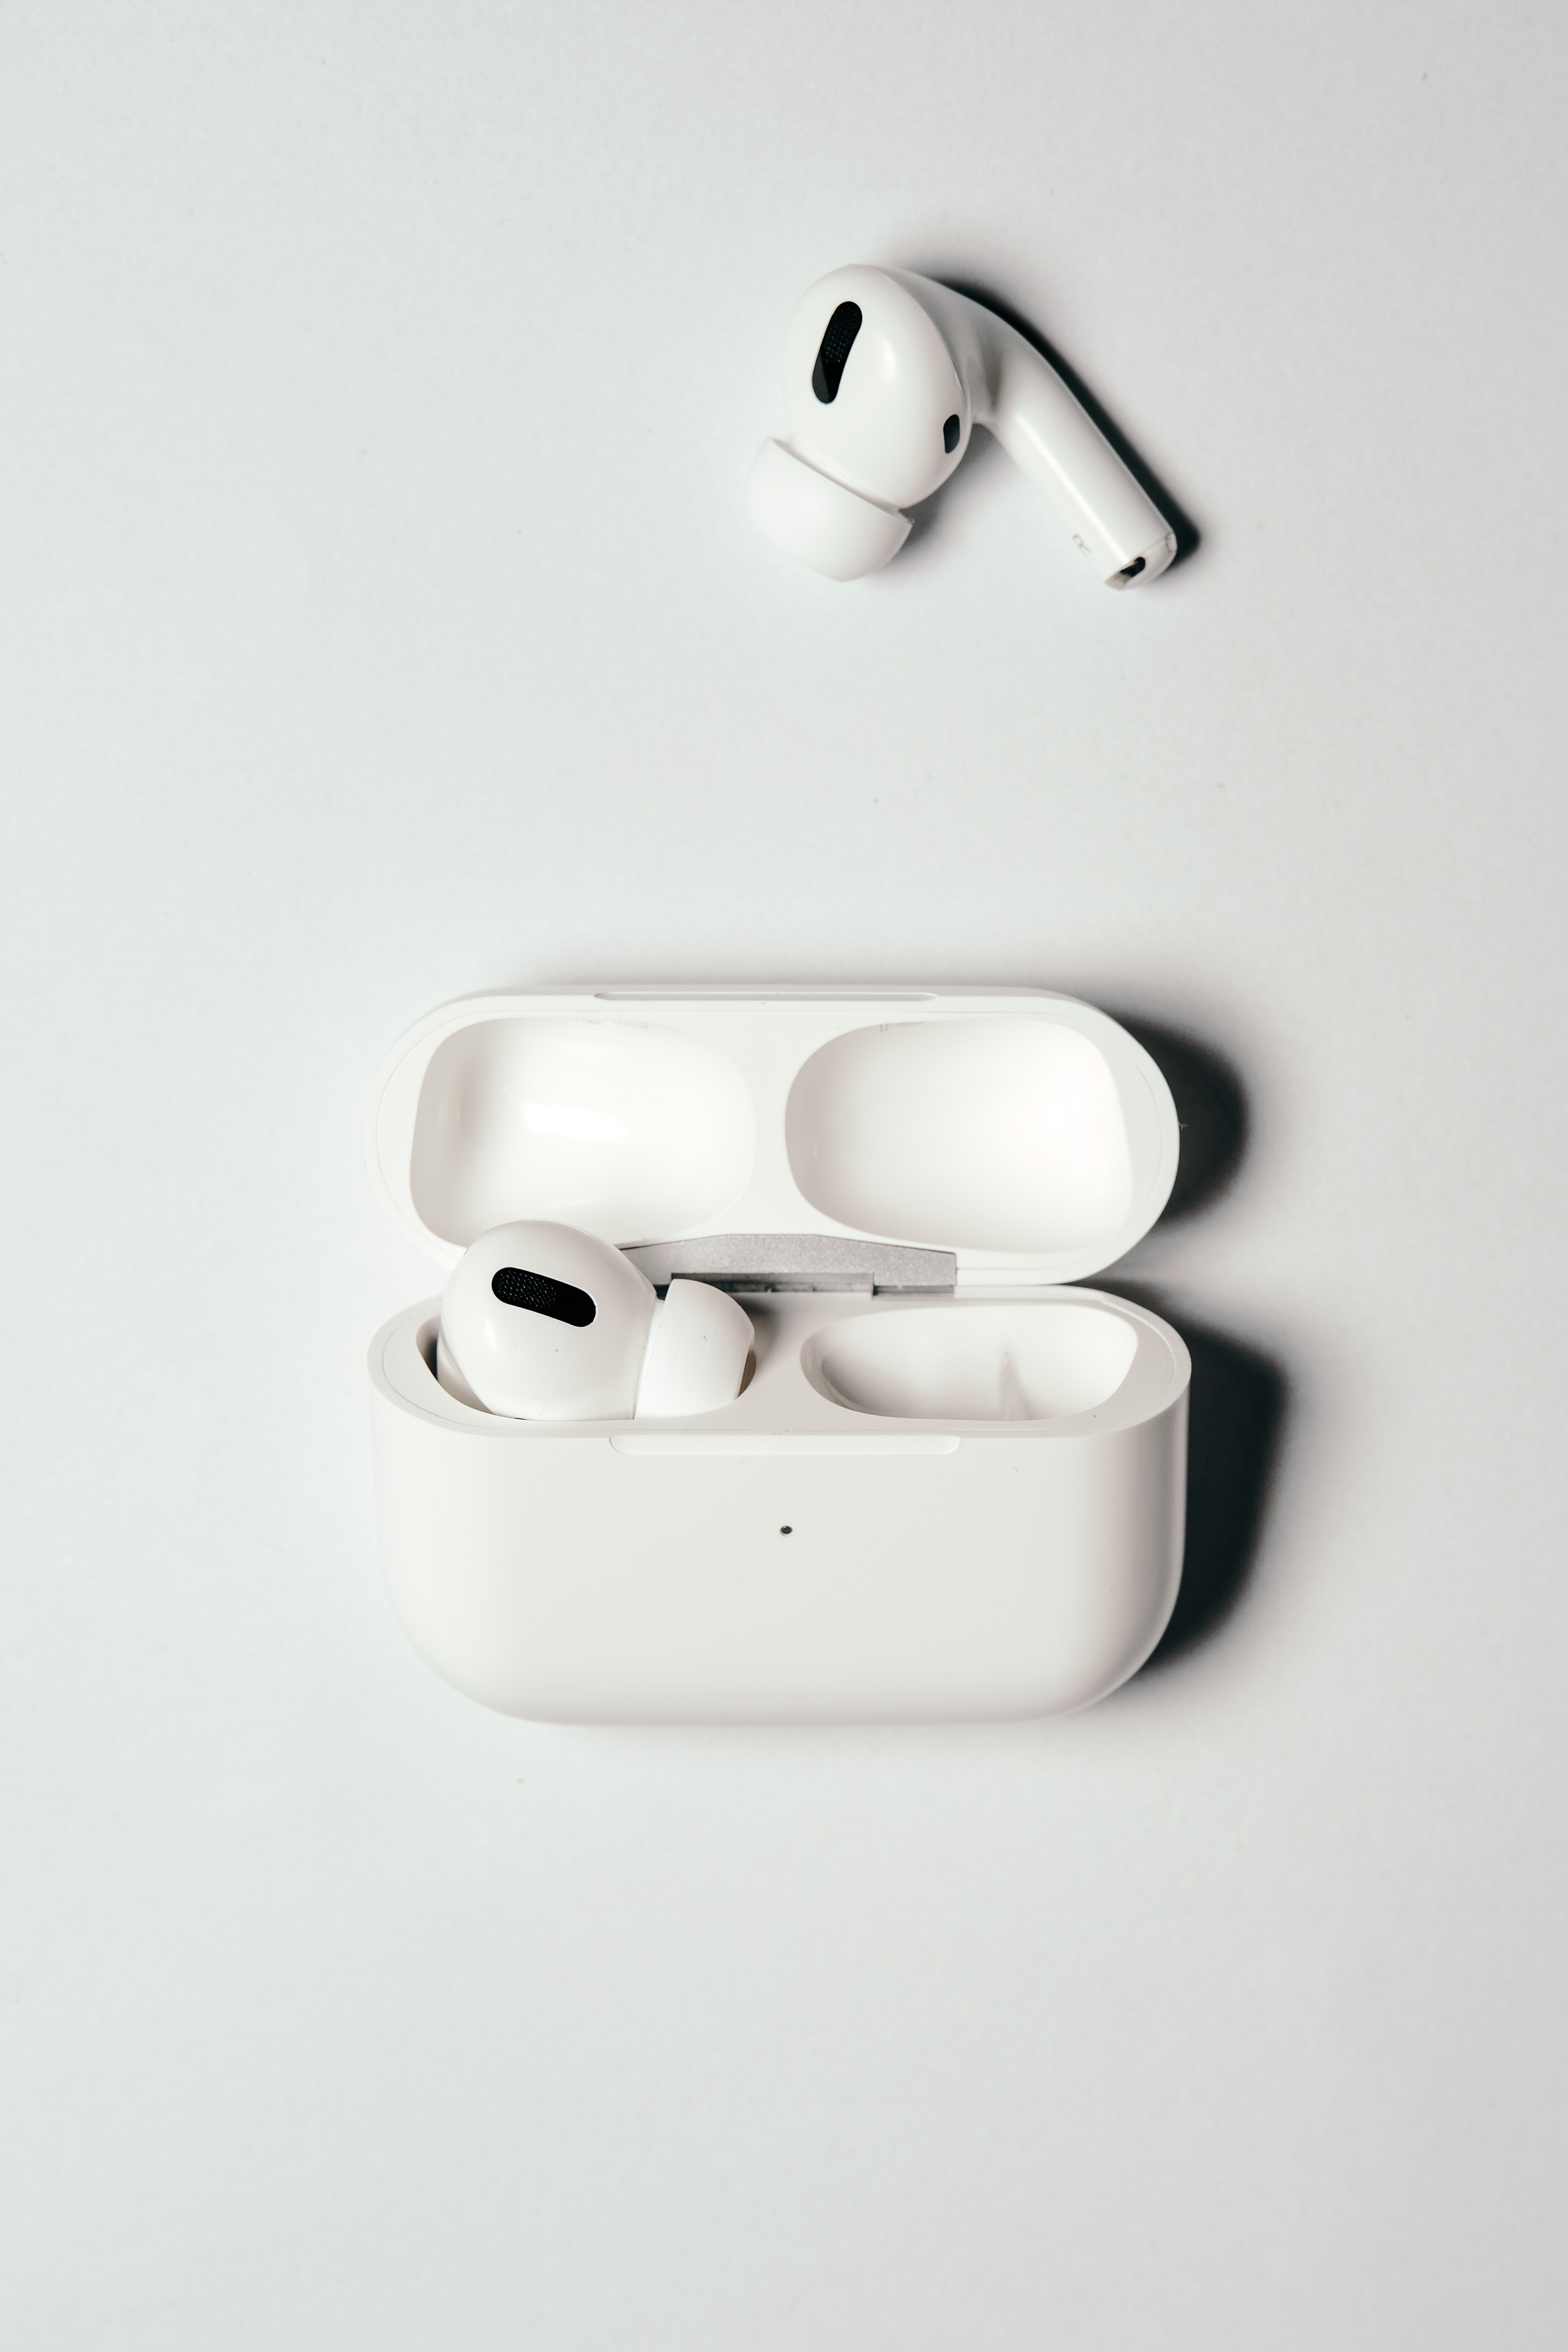 airpods picture 2nd generation